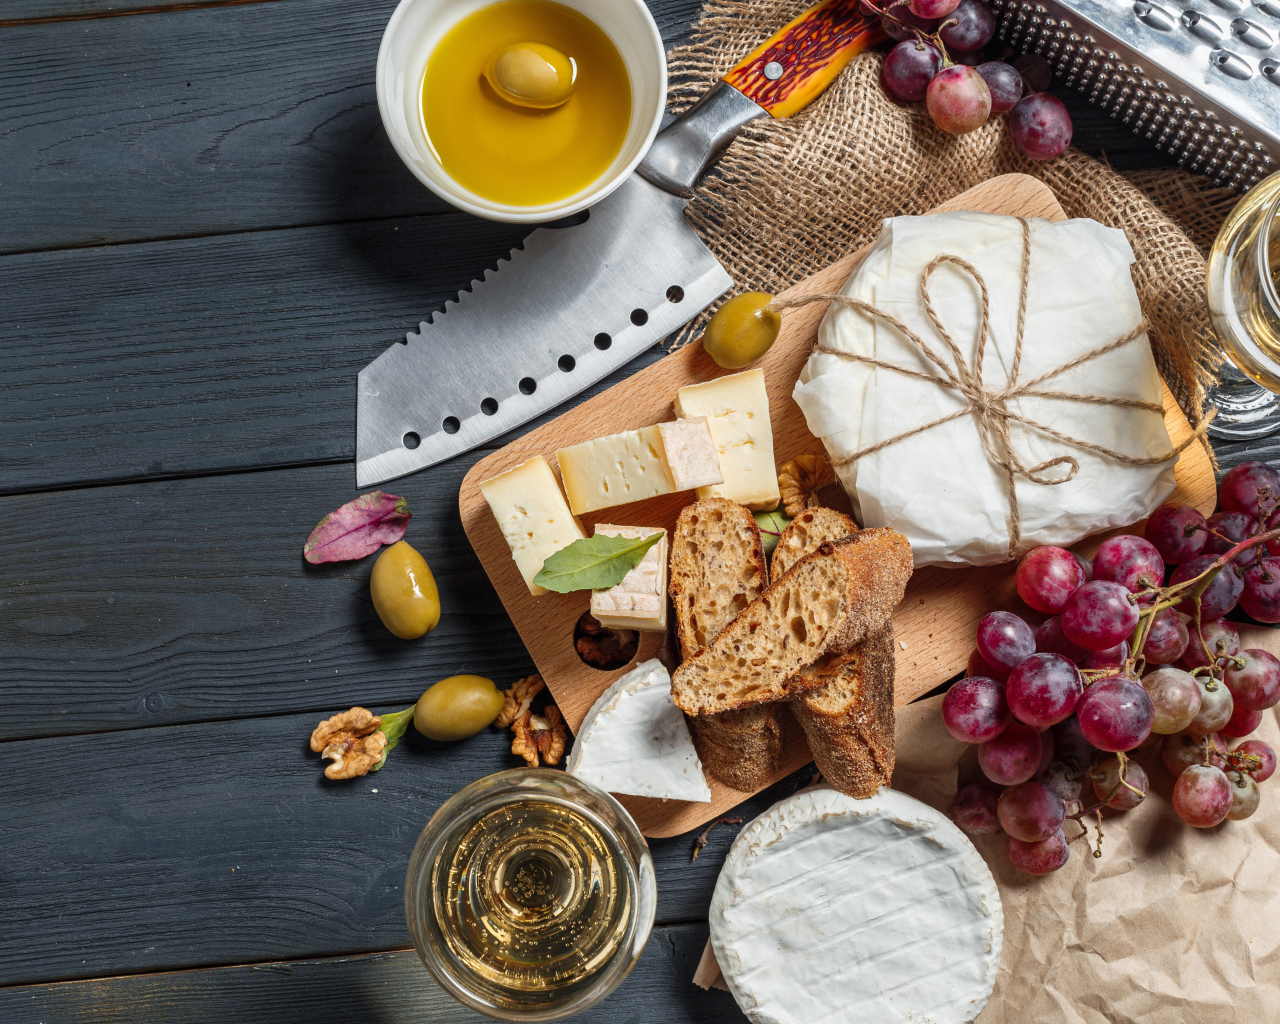 Grapes on a table with cheese, bread and olives